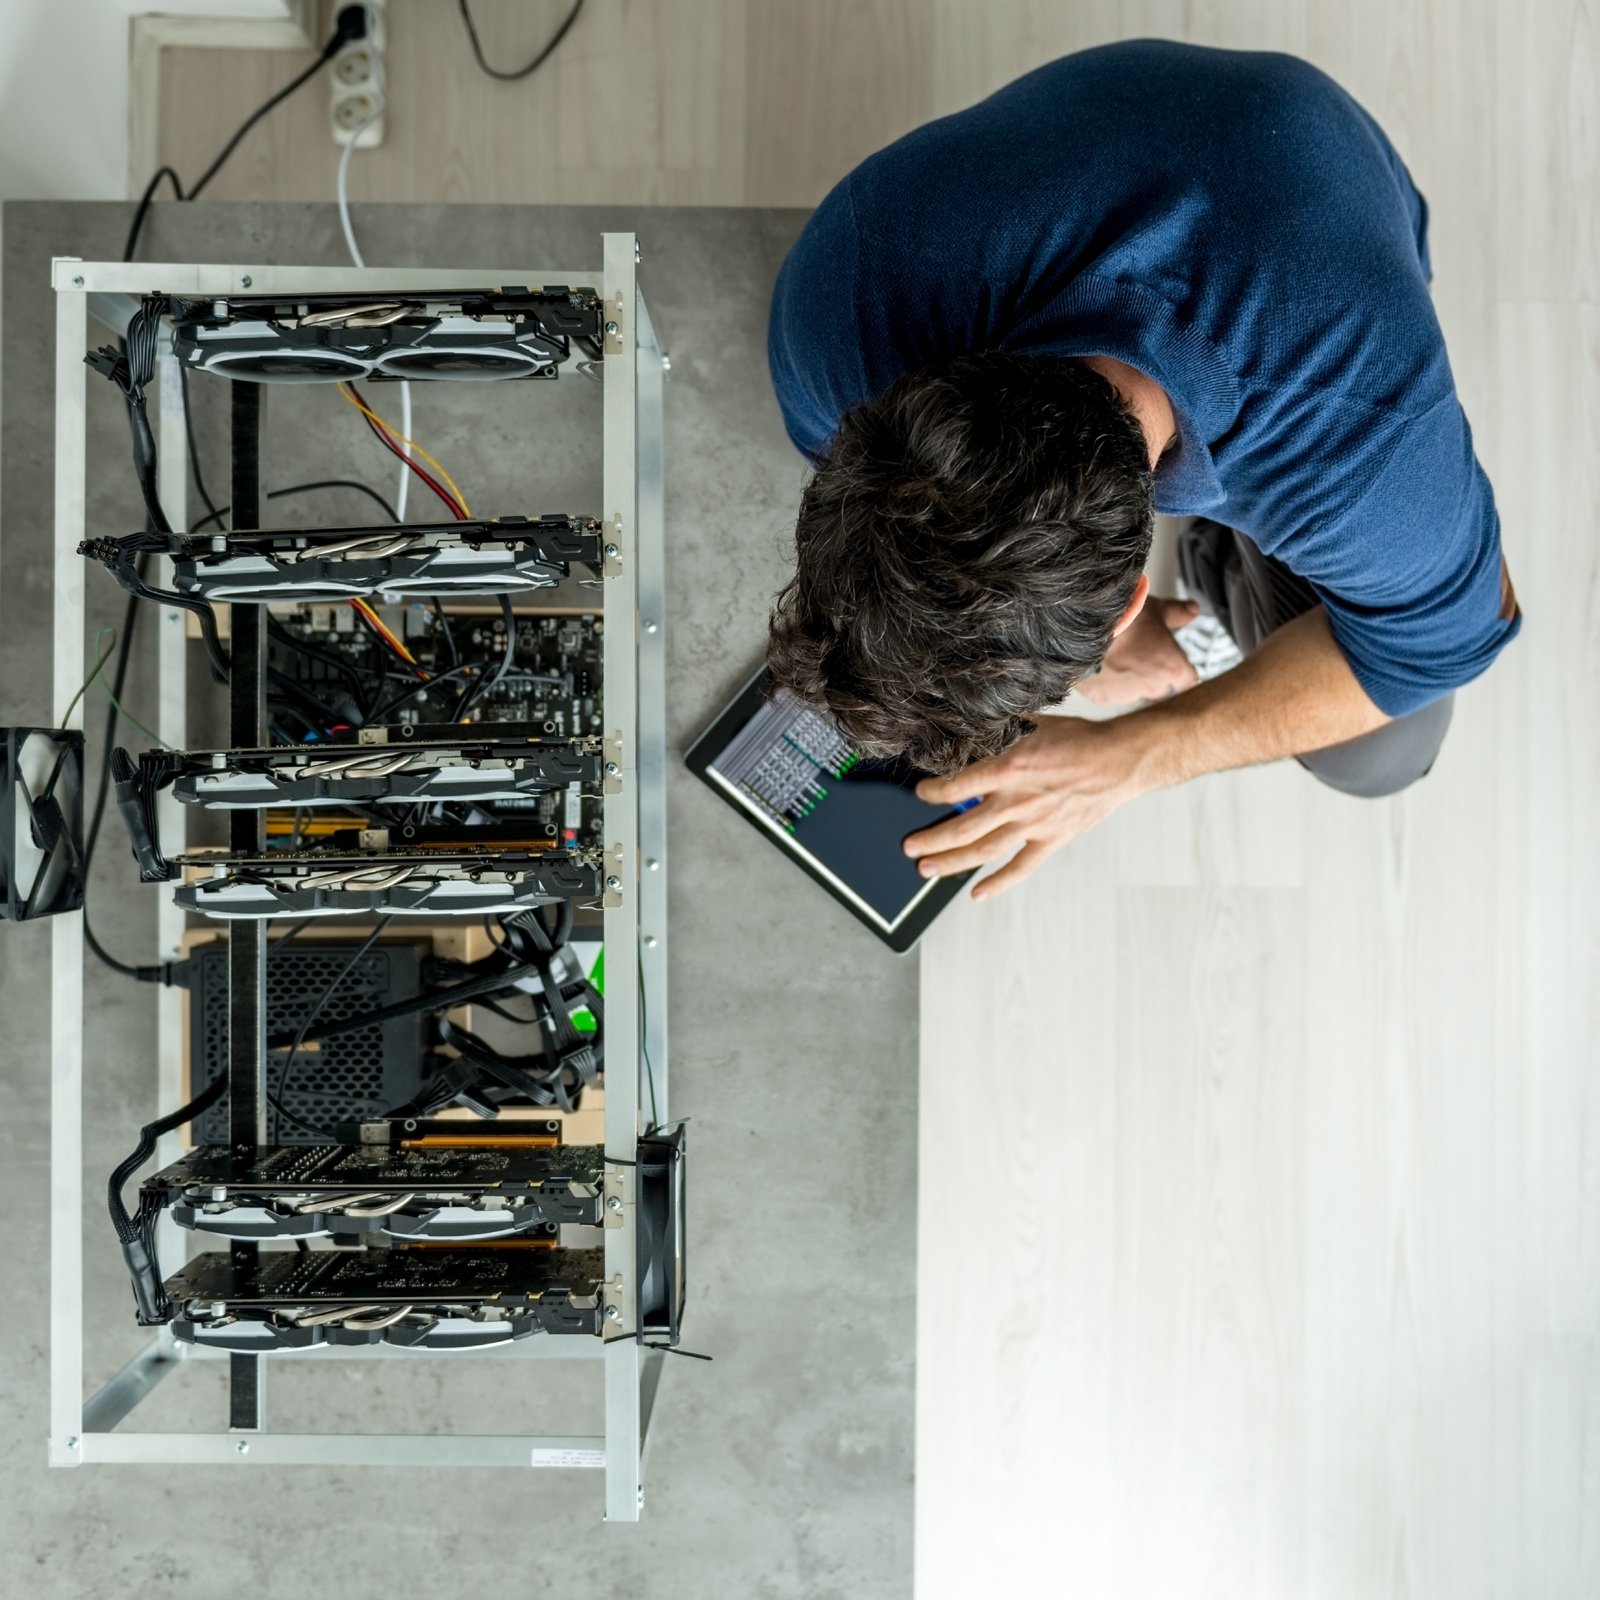 Learn How To Build A Mining Rig: Things To Know Before The Start